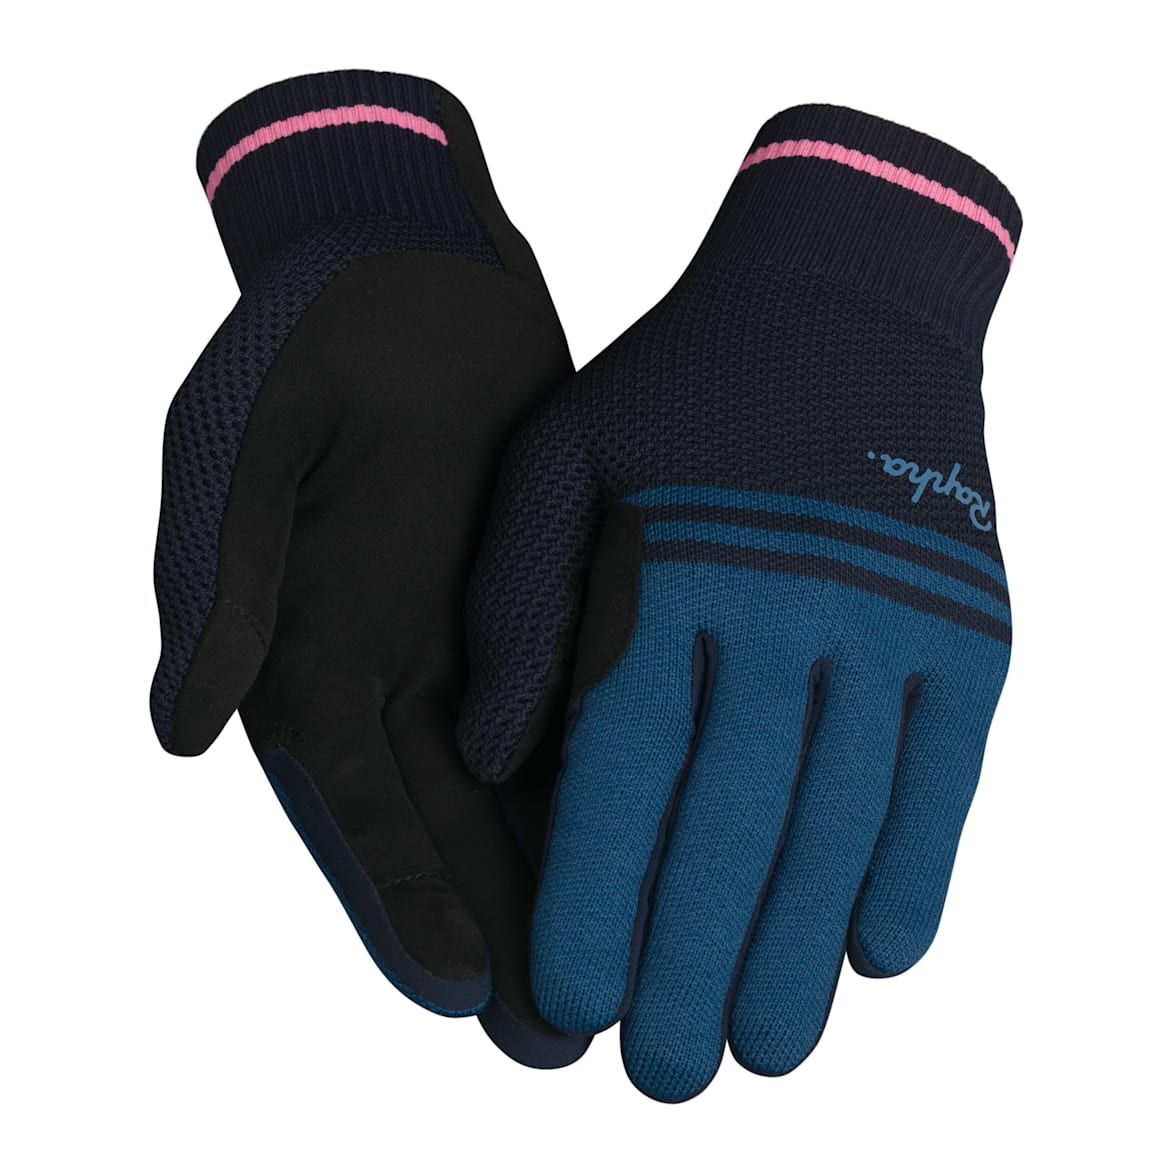 2018 Bike Gloves & Mitts - for Winter & Summer Cycling | Rapha Site